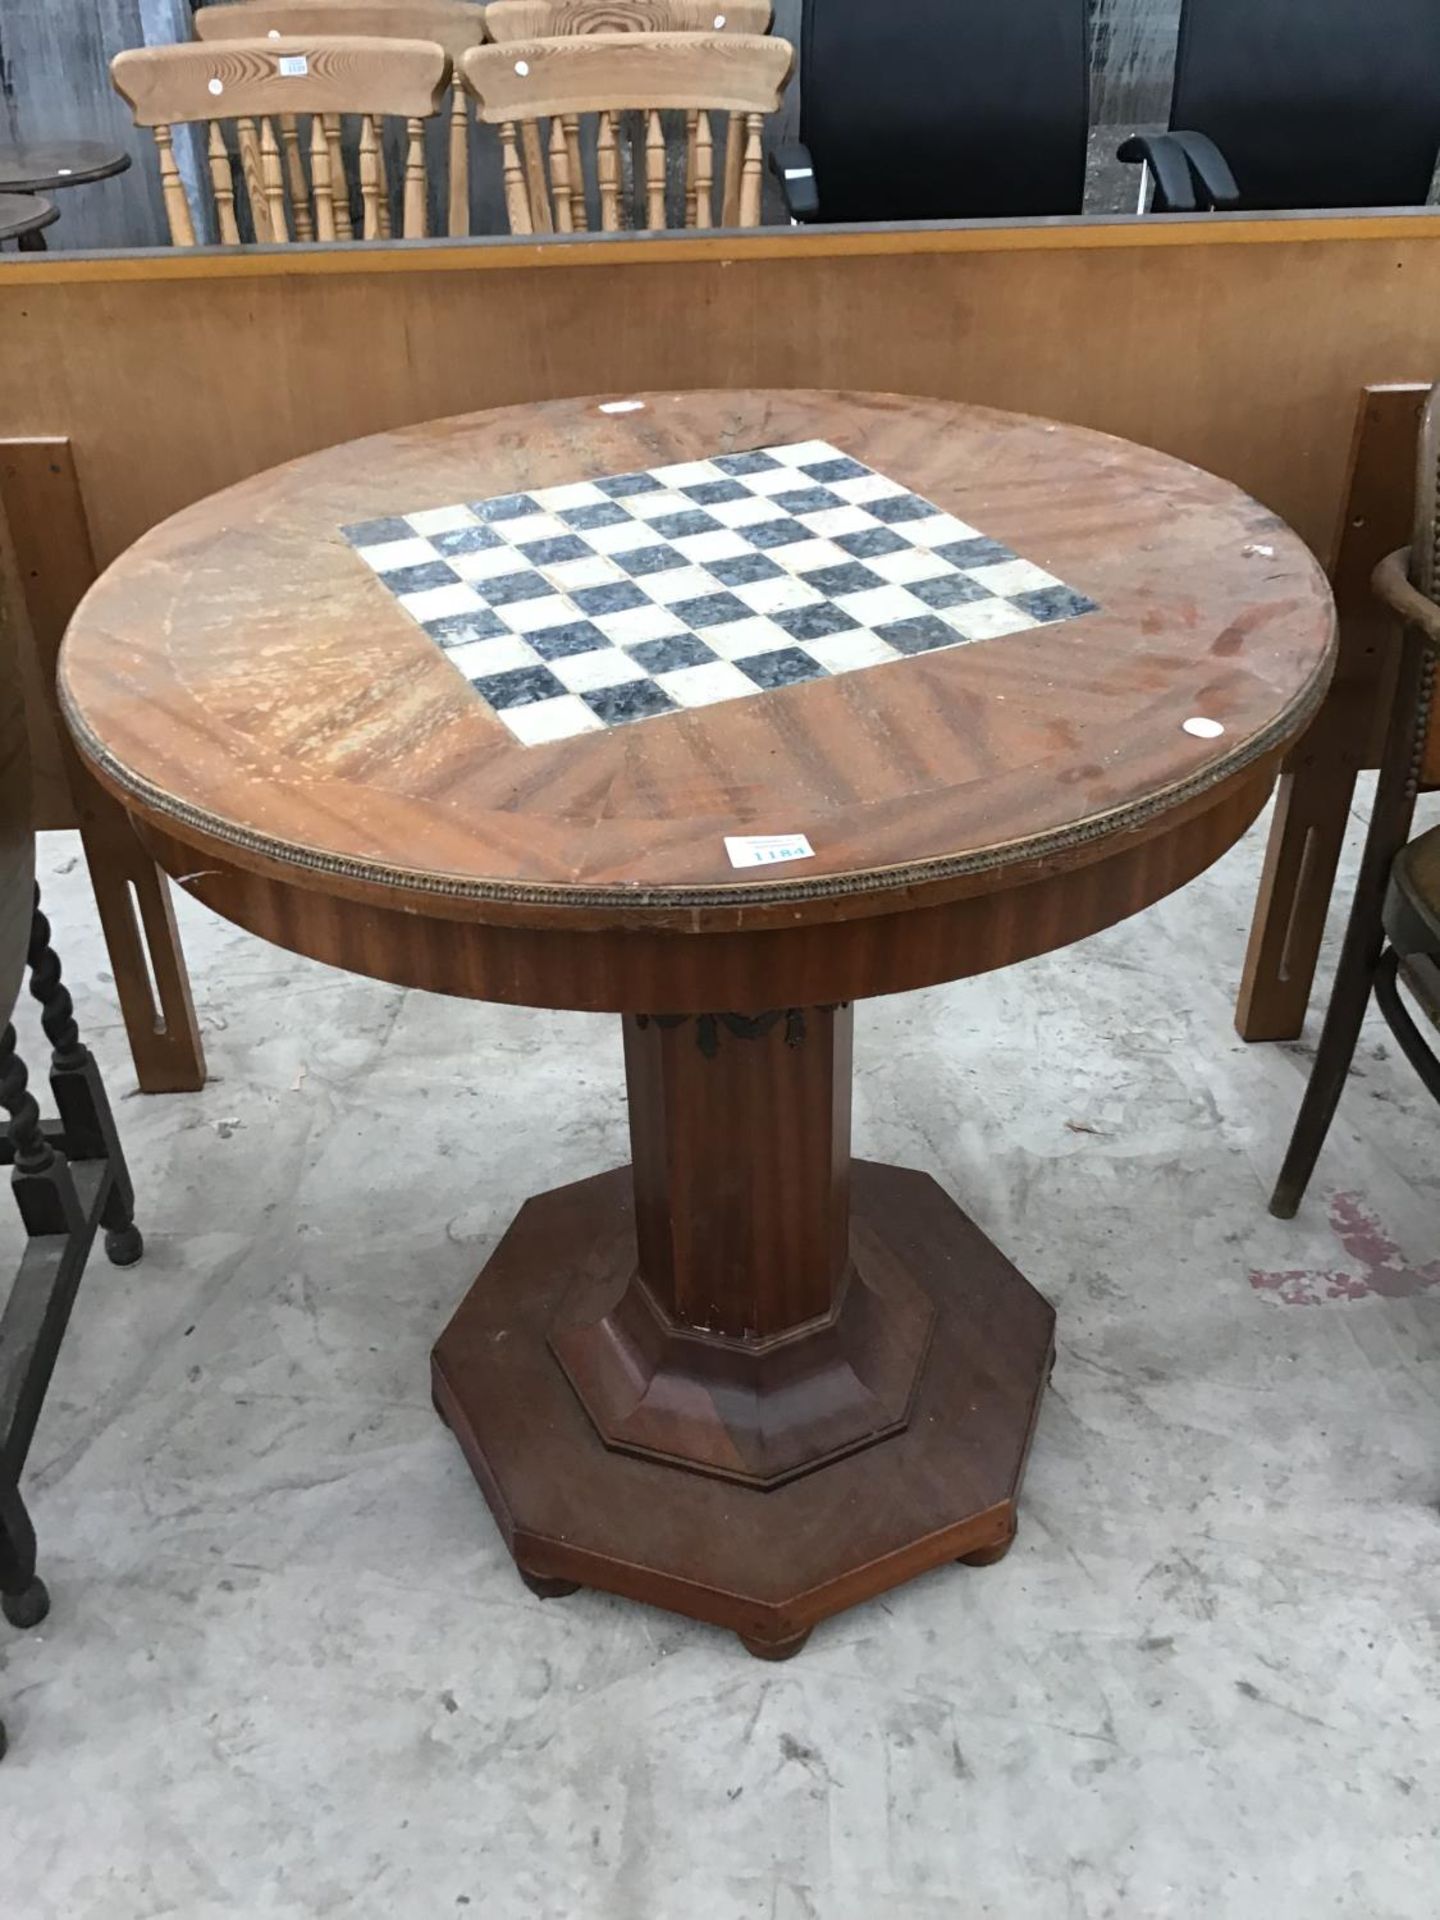 A FRENCH DECORATIVE CIRCULAR TOPPED GAMES TABLE